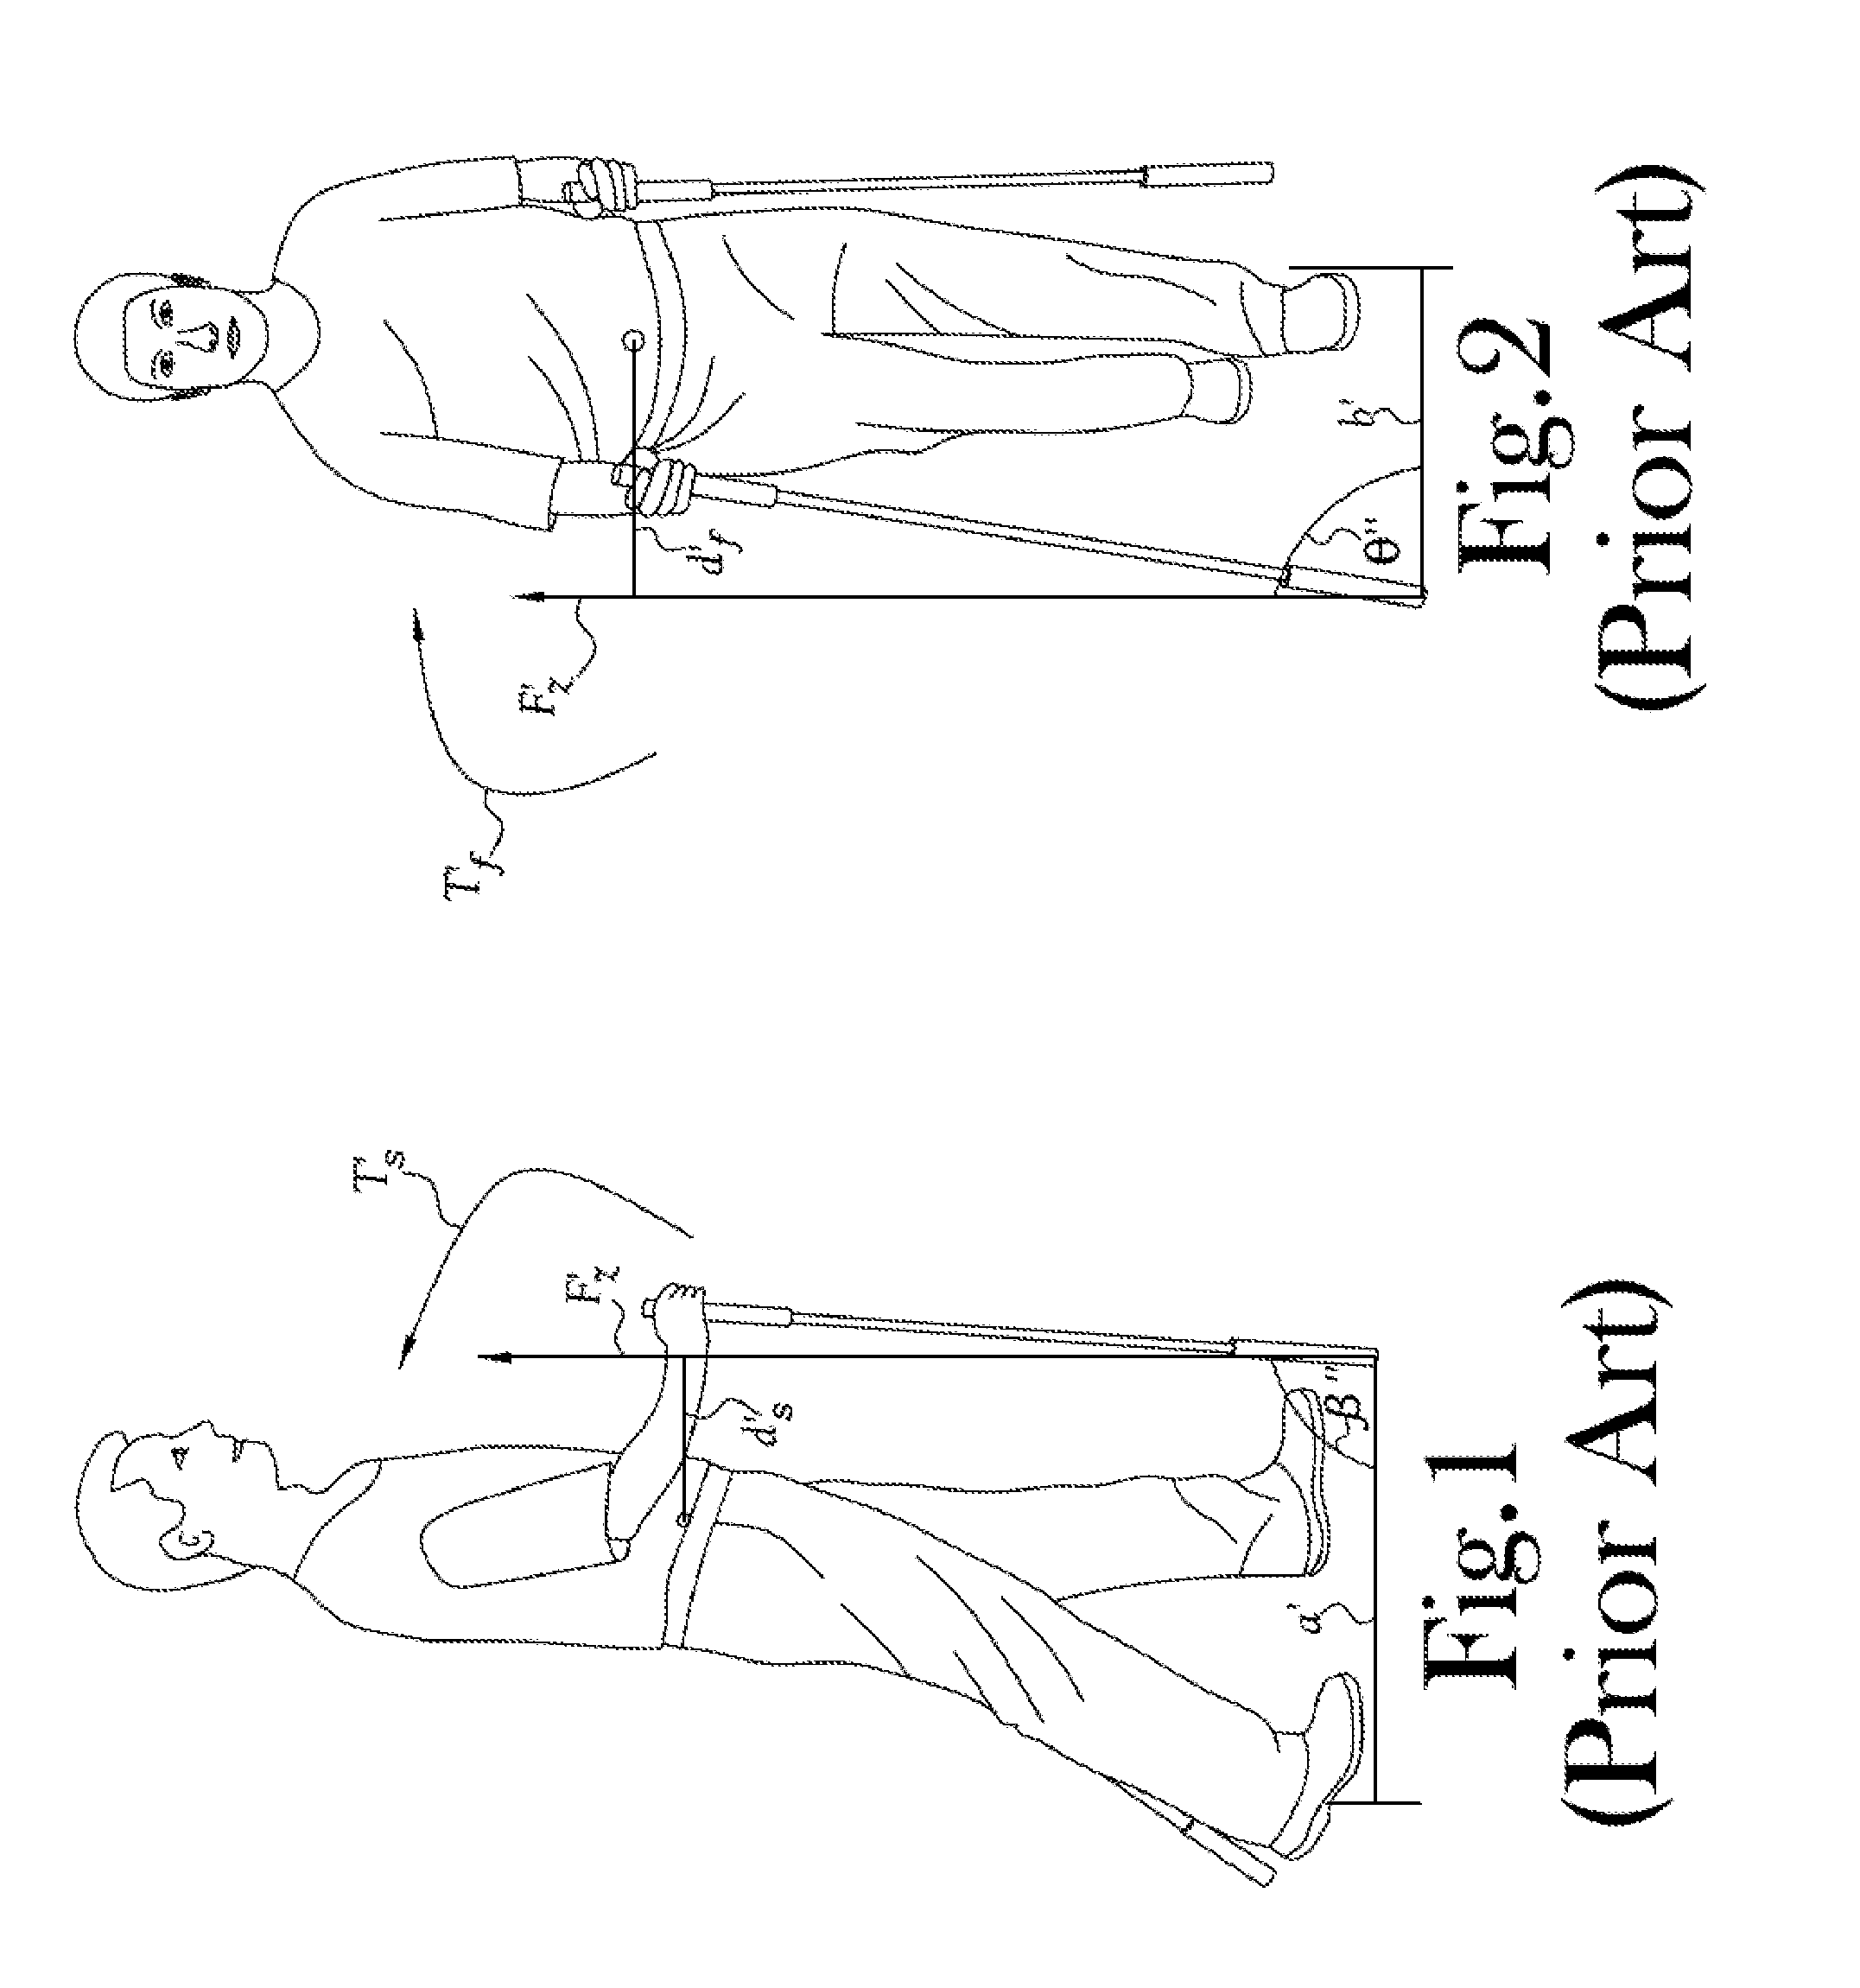 Exercise Device for Use as a Walking Stick Having an Ergonomically Angled Handle